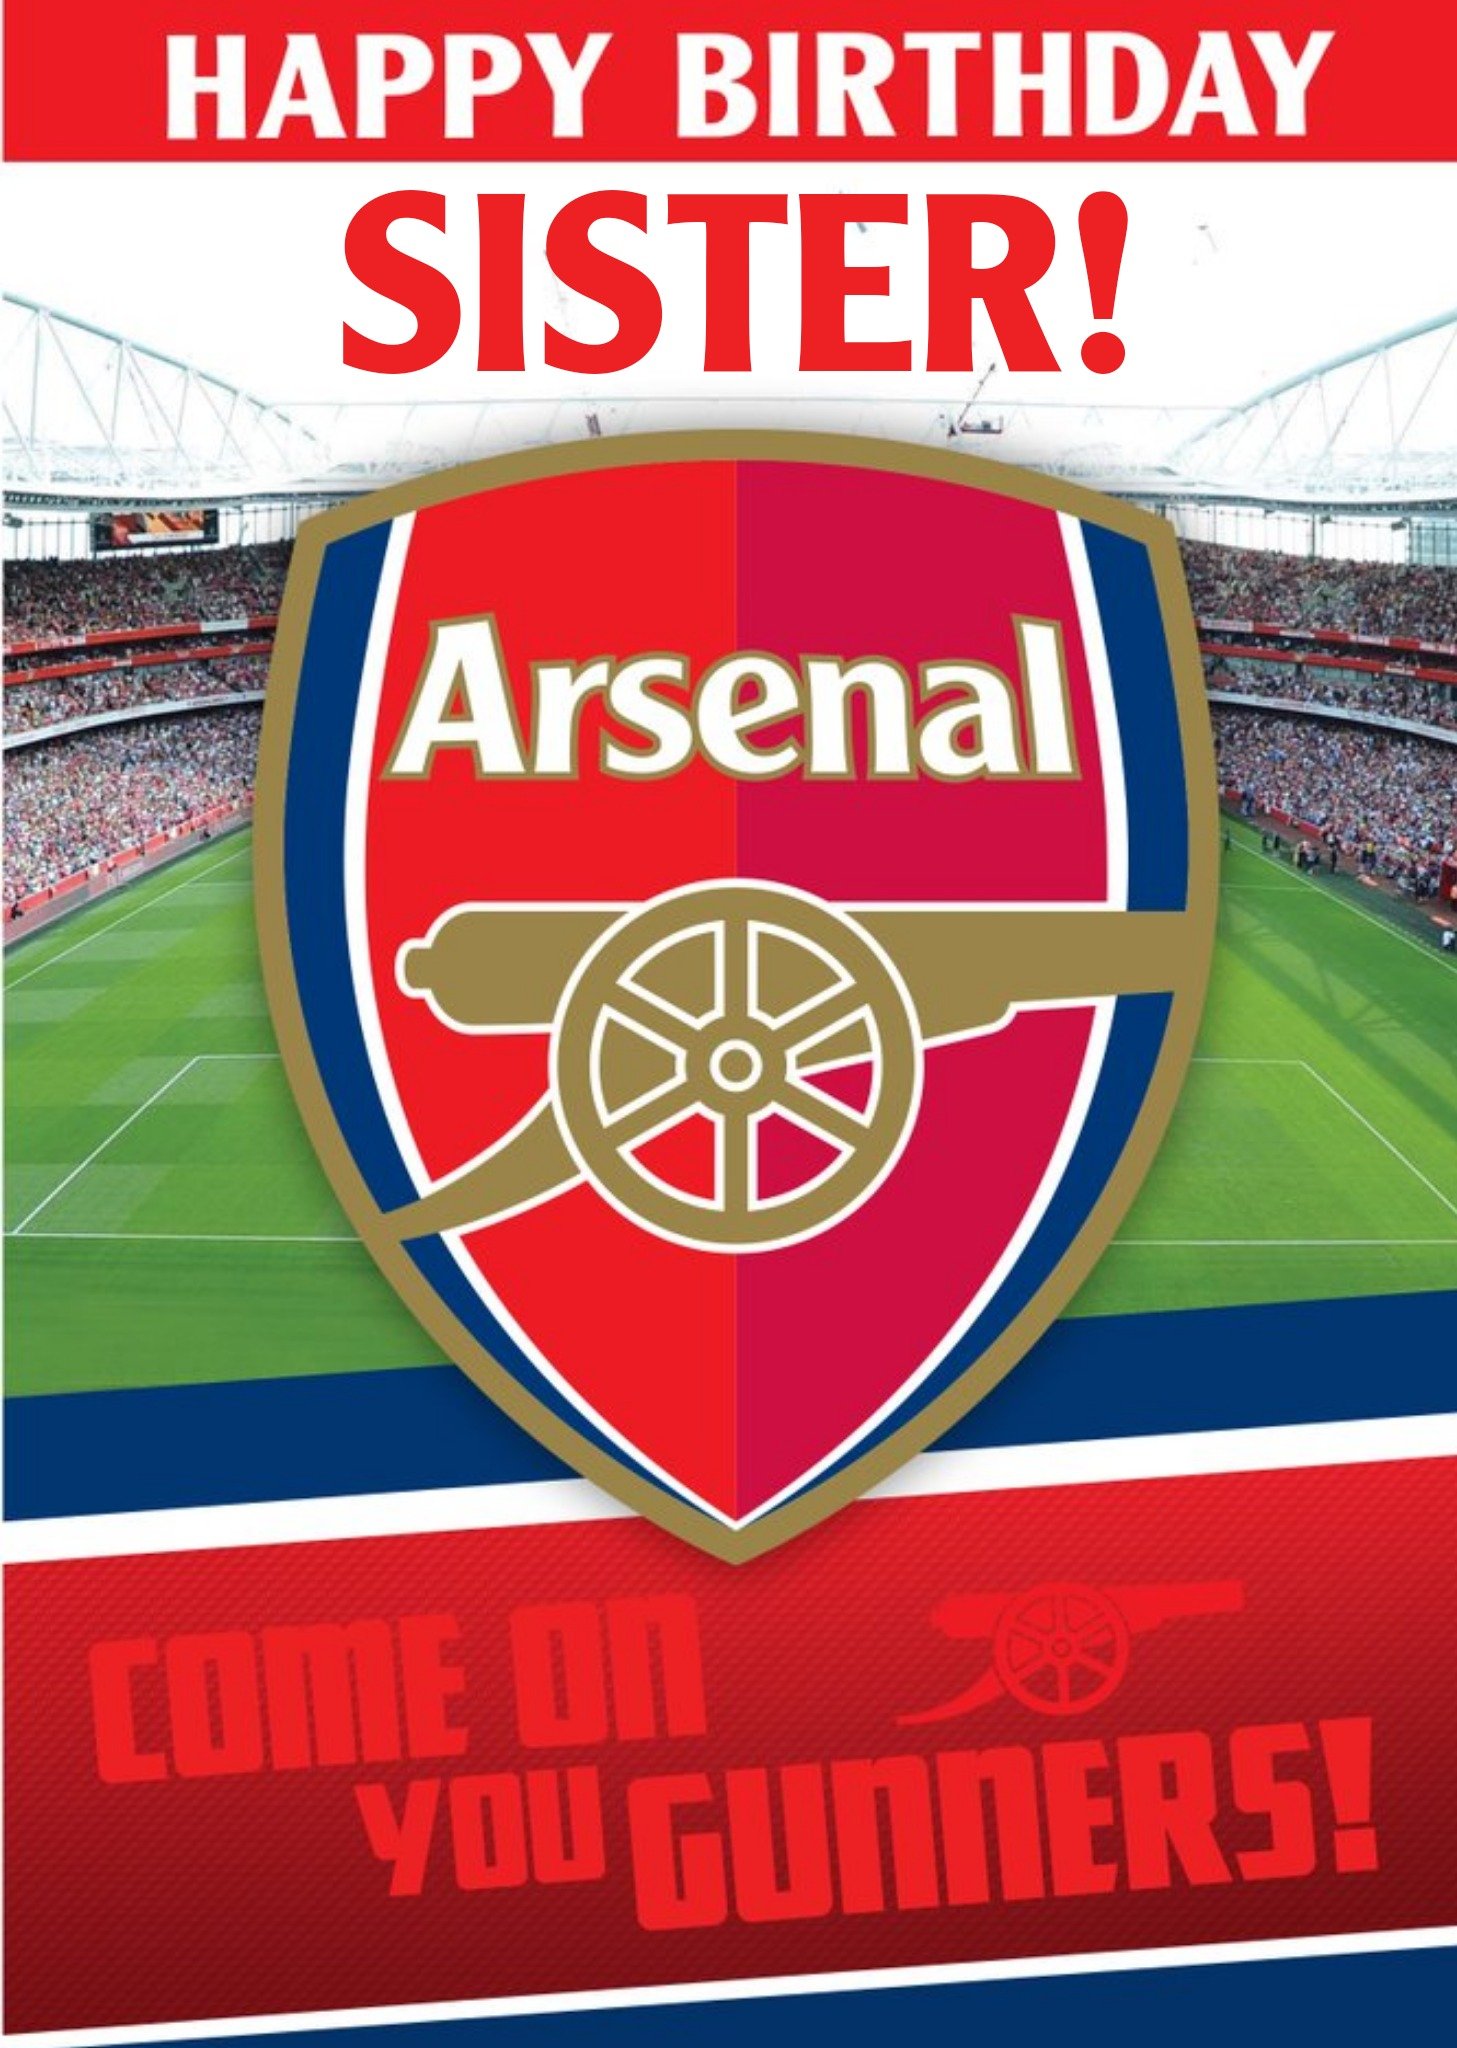 Arsenal Football Stadium Come On You Gunners Sister Happy Birthday Card, Large